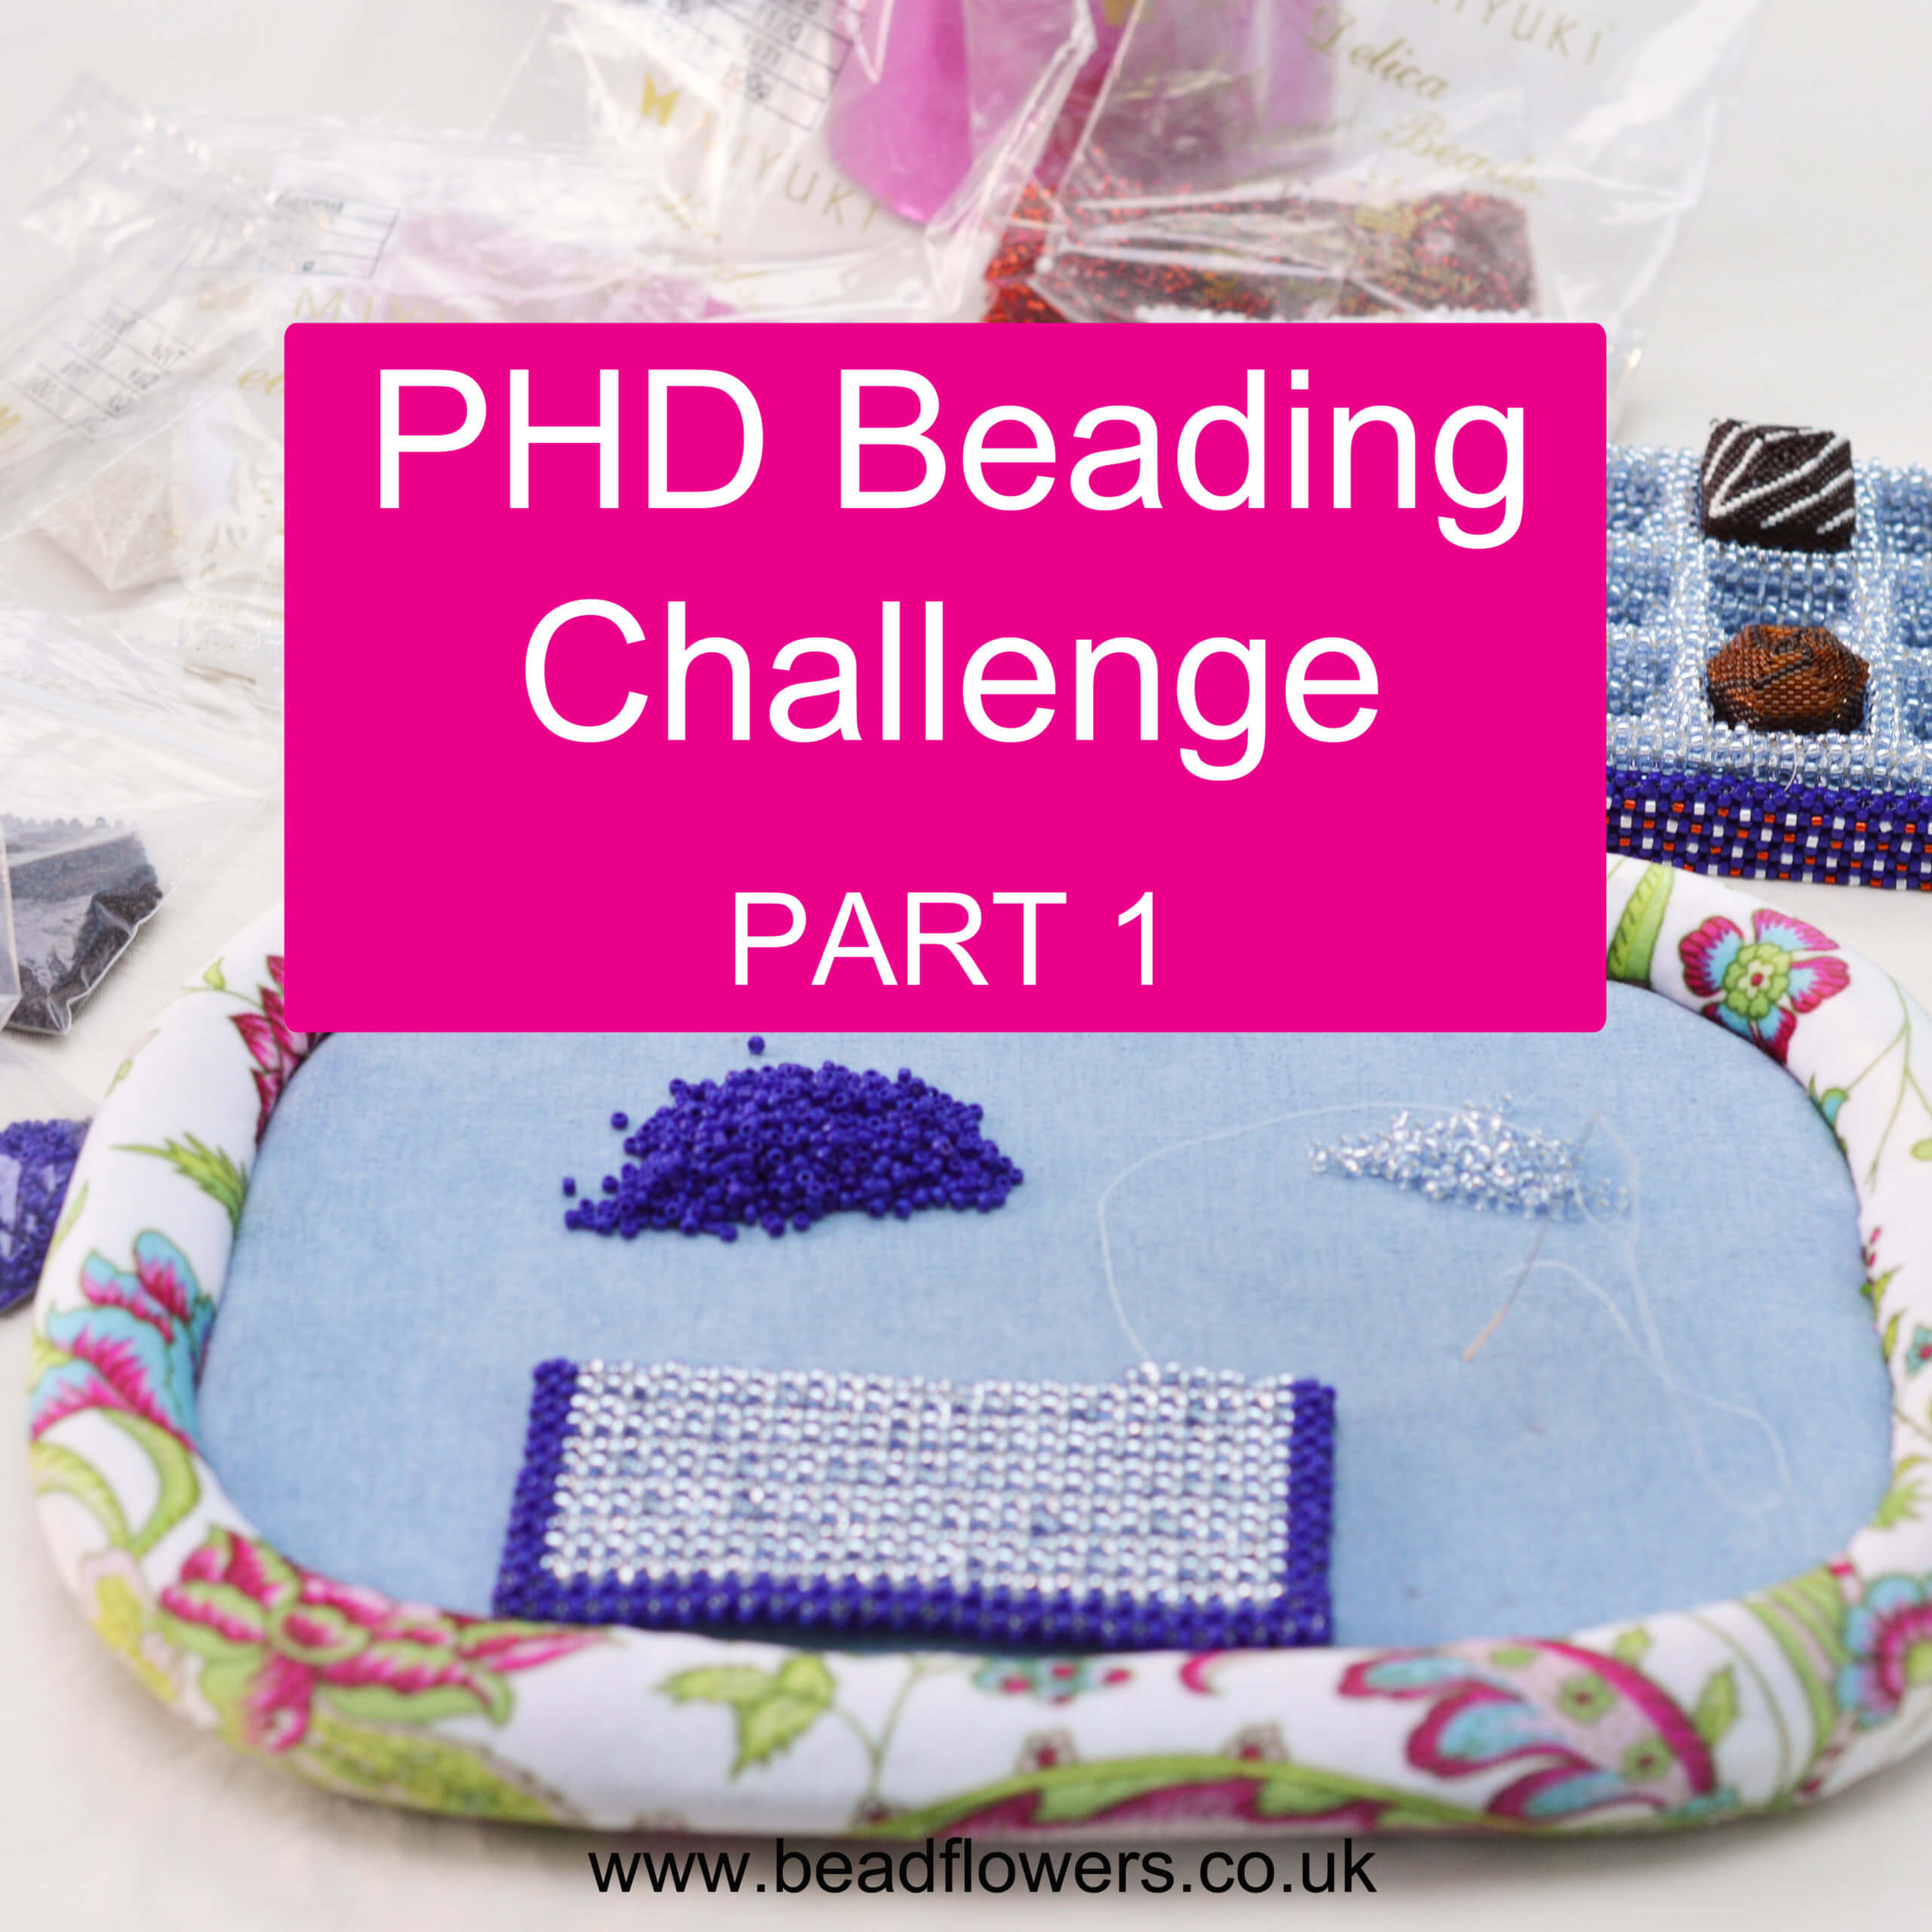 Beading Challenge - how many PHDs can you finish? Part 1 with Katie Dean, Beadflowers